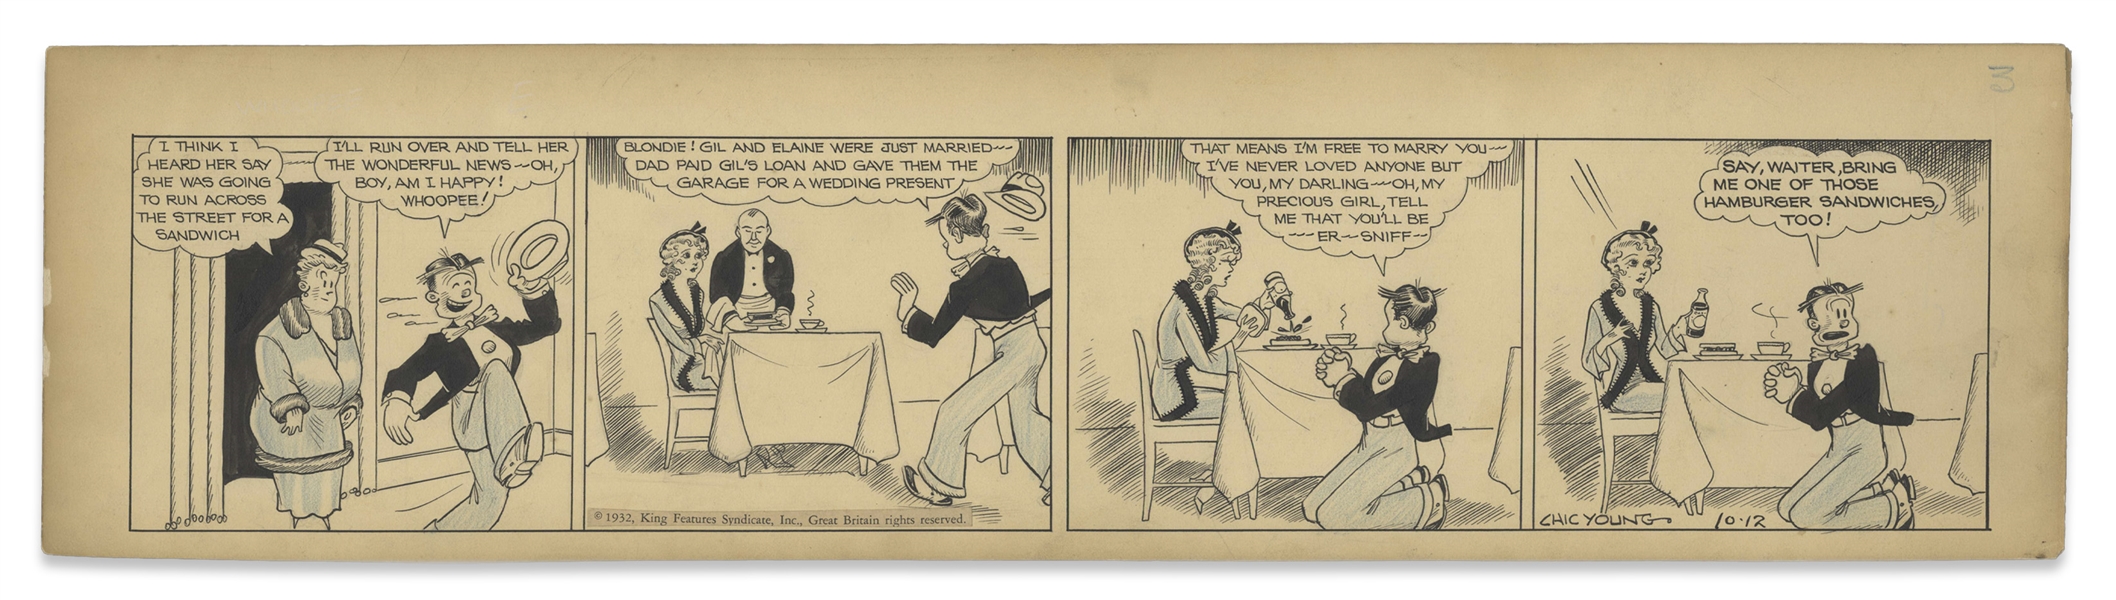 Chic Young Hand-Drawn ''Blondie'' Comic Strip From 1932 Titled ''A Boy in Love'' -- Dagwood Proposes to Blondie Before Getting Distracted by a Sandwich